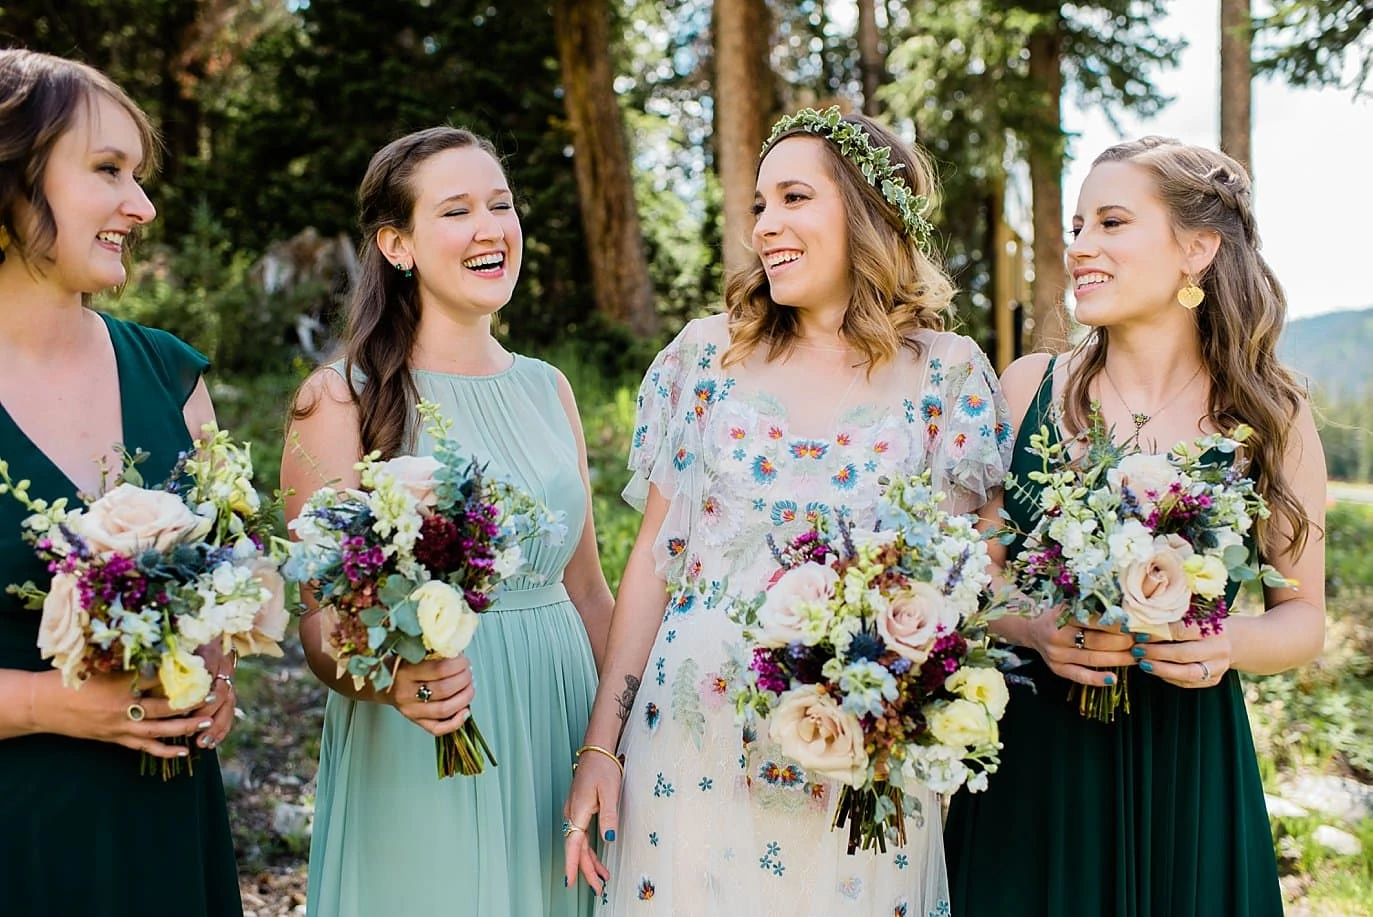 bride in unique boho floral dress and bridesmaids in green dresses at Arapahoe Basin wedding by Rocky Mountain Wedding photographer Jennie Crate photographer